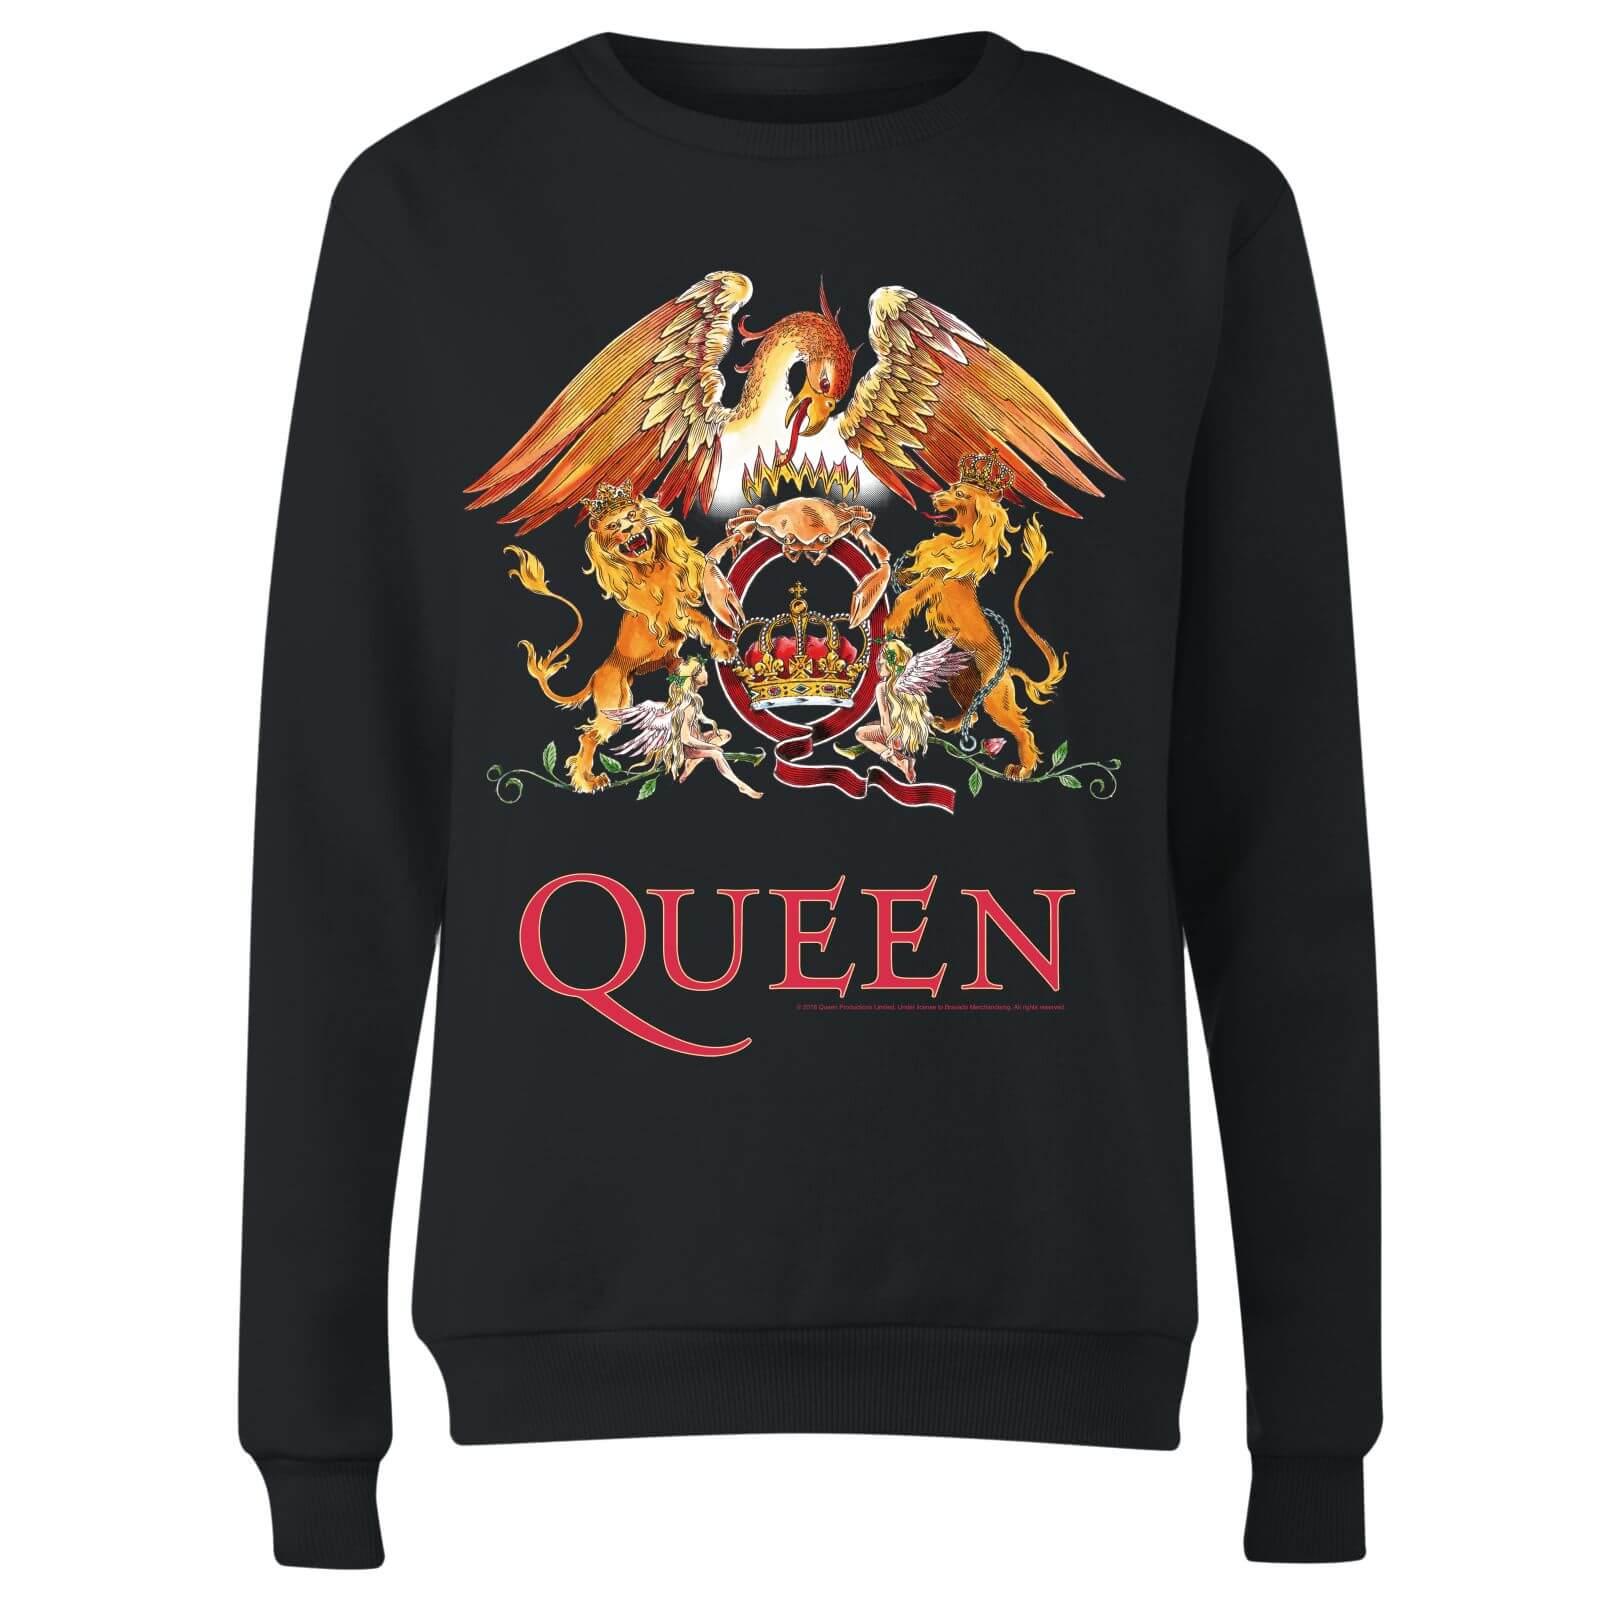 Amp Grey OFFICIAL! Pull Over Hoodie Queen 'Royal Crest'